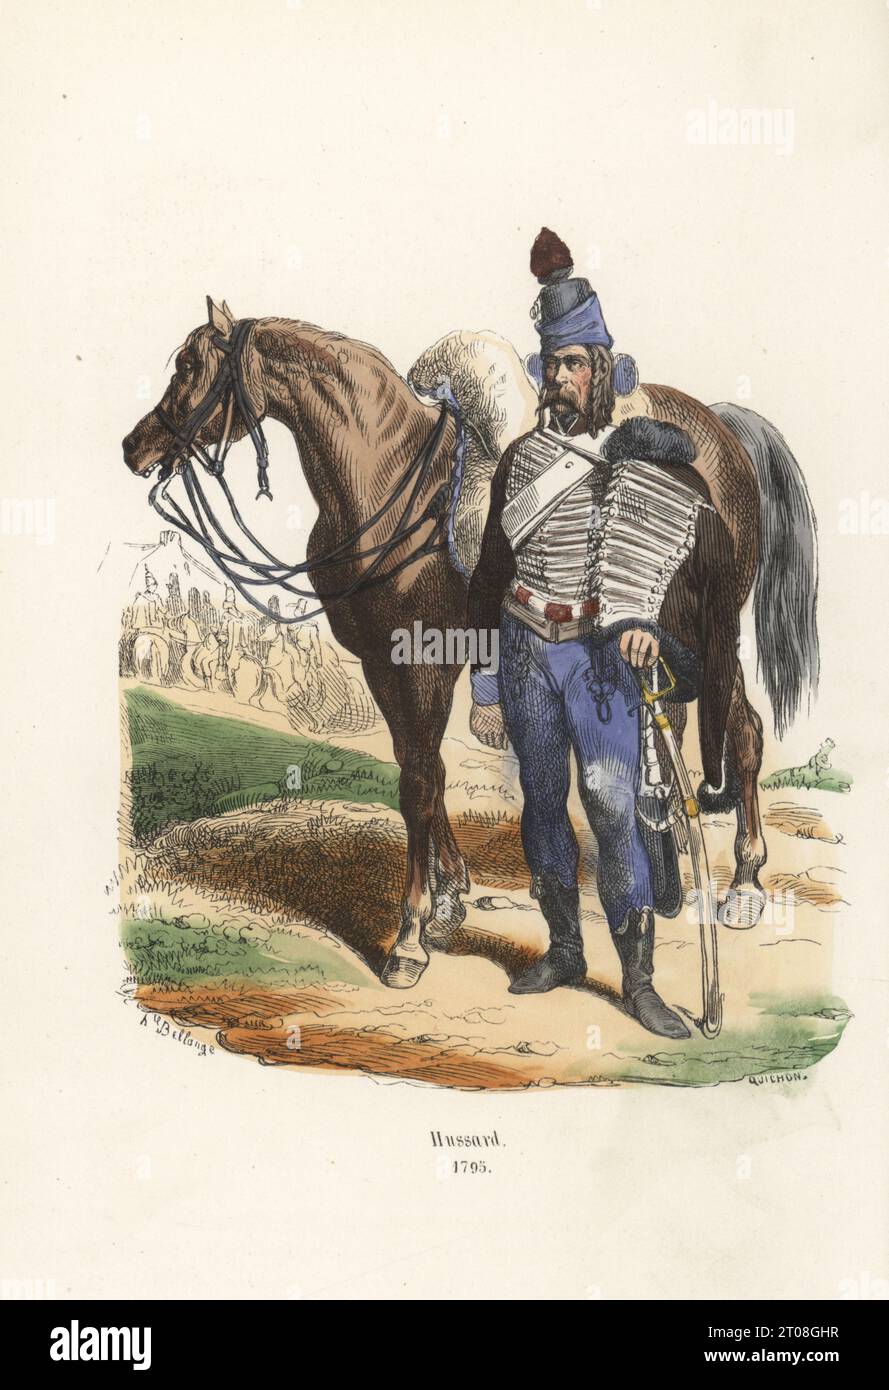 Uniform of a French Hussar, 1795. In schako, brown fur pelisse and dolman with frogging, blue trousers, boots, sabretache, armed with sabre. Uniform of the 13th Hussars cavalry regiment. Mouton shabrack. Hussard. Handcoloured woodcut by Quichon after an illustration by Hippolyte Bellangé from P.M. Laurent de l’Ardeche’s Histoire de Napoleon, Paris, 1840. Stock Photo